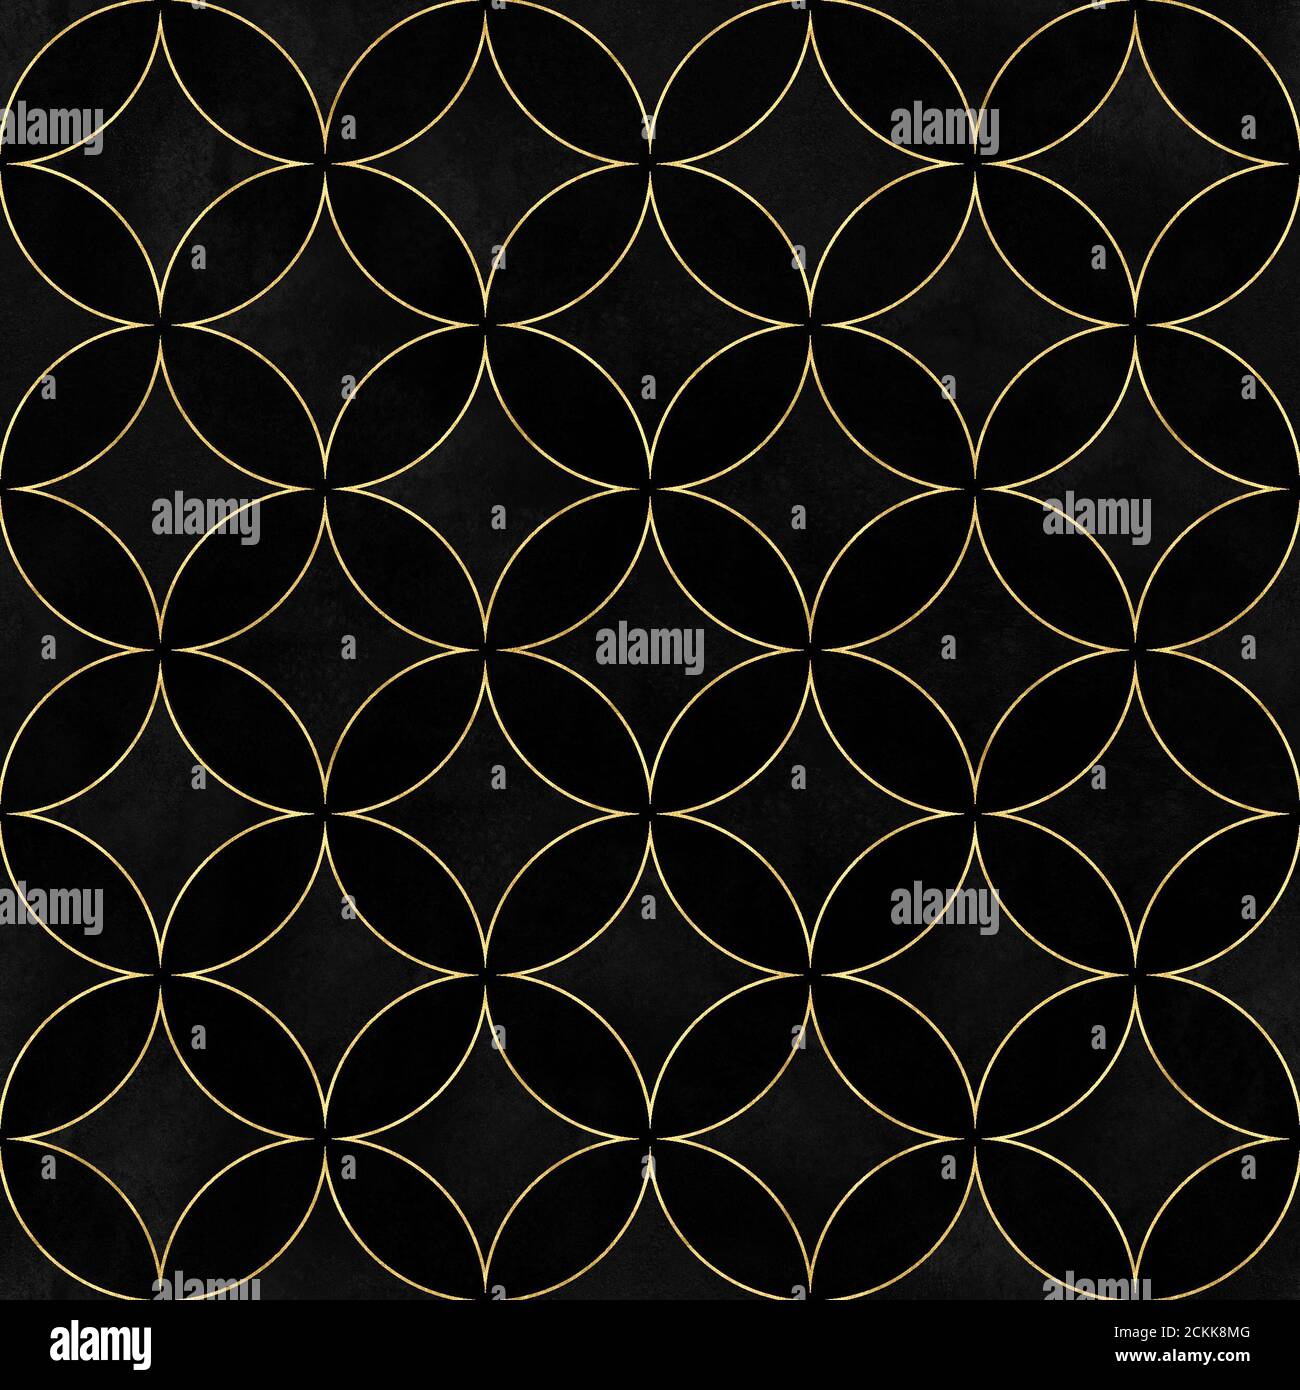 Black velvet luxury overlapping circles seamless texture. Watercolor hand drawn black and gold pattern background. Watercolour geometrical sphere shap Stock Photo